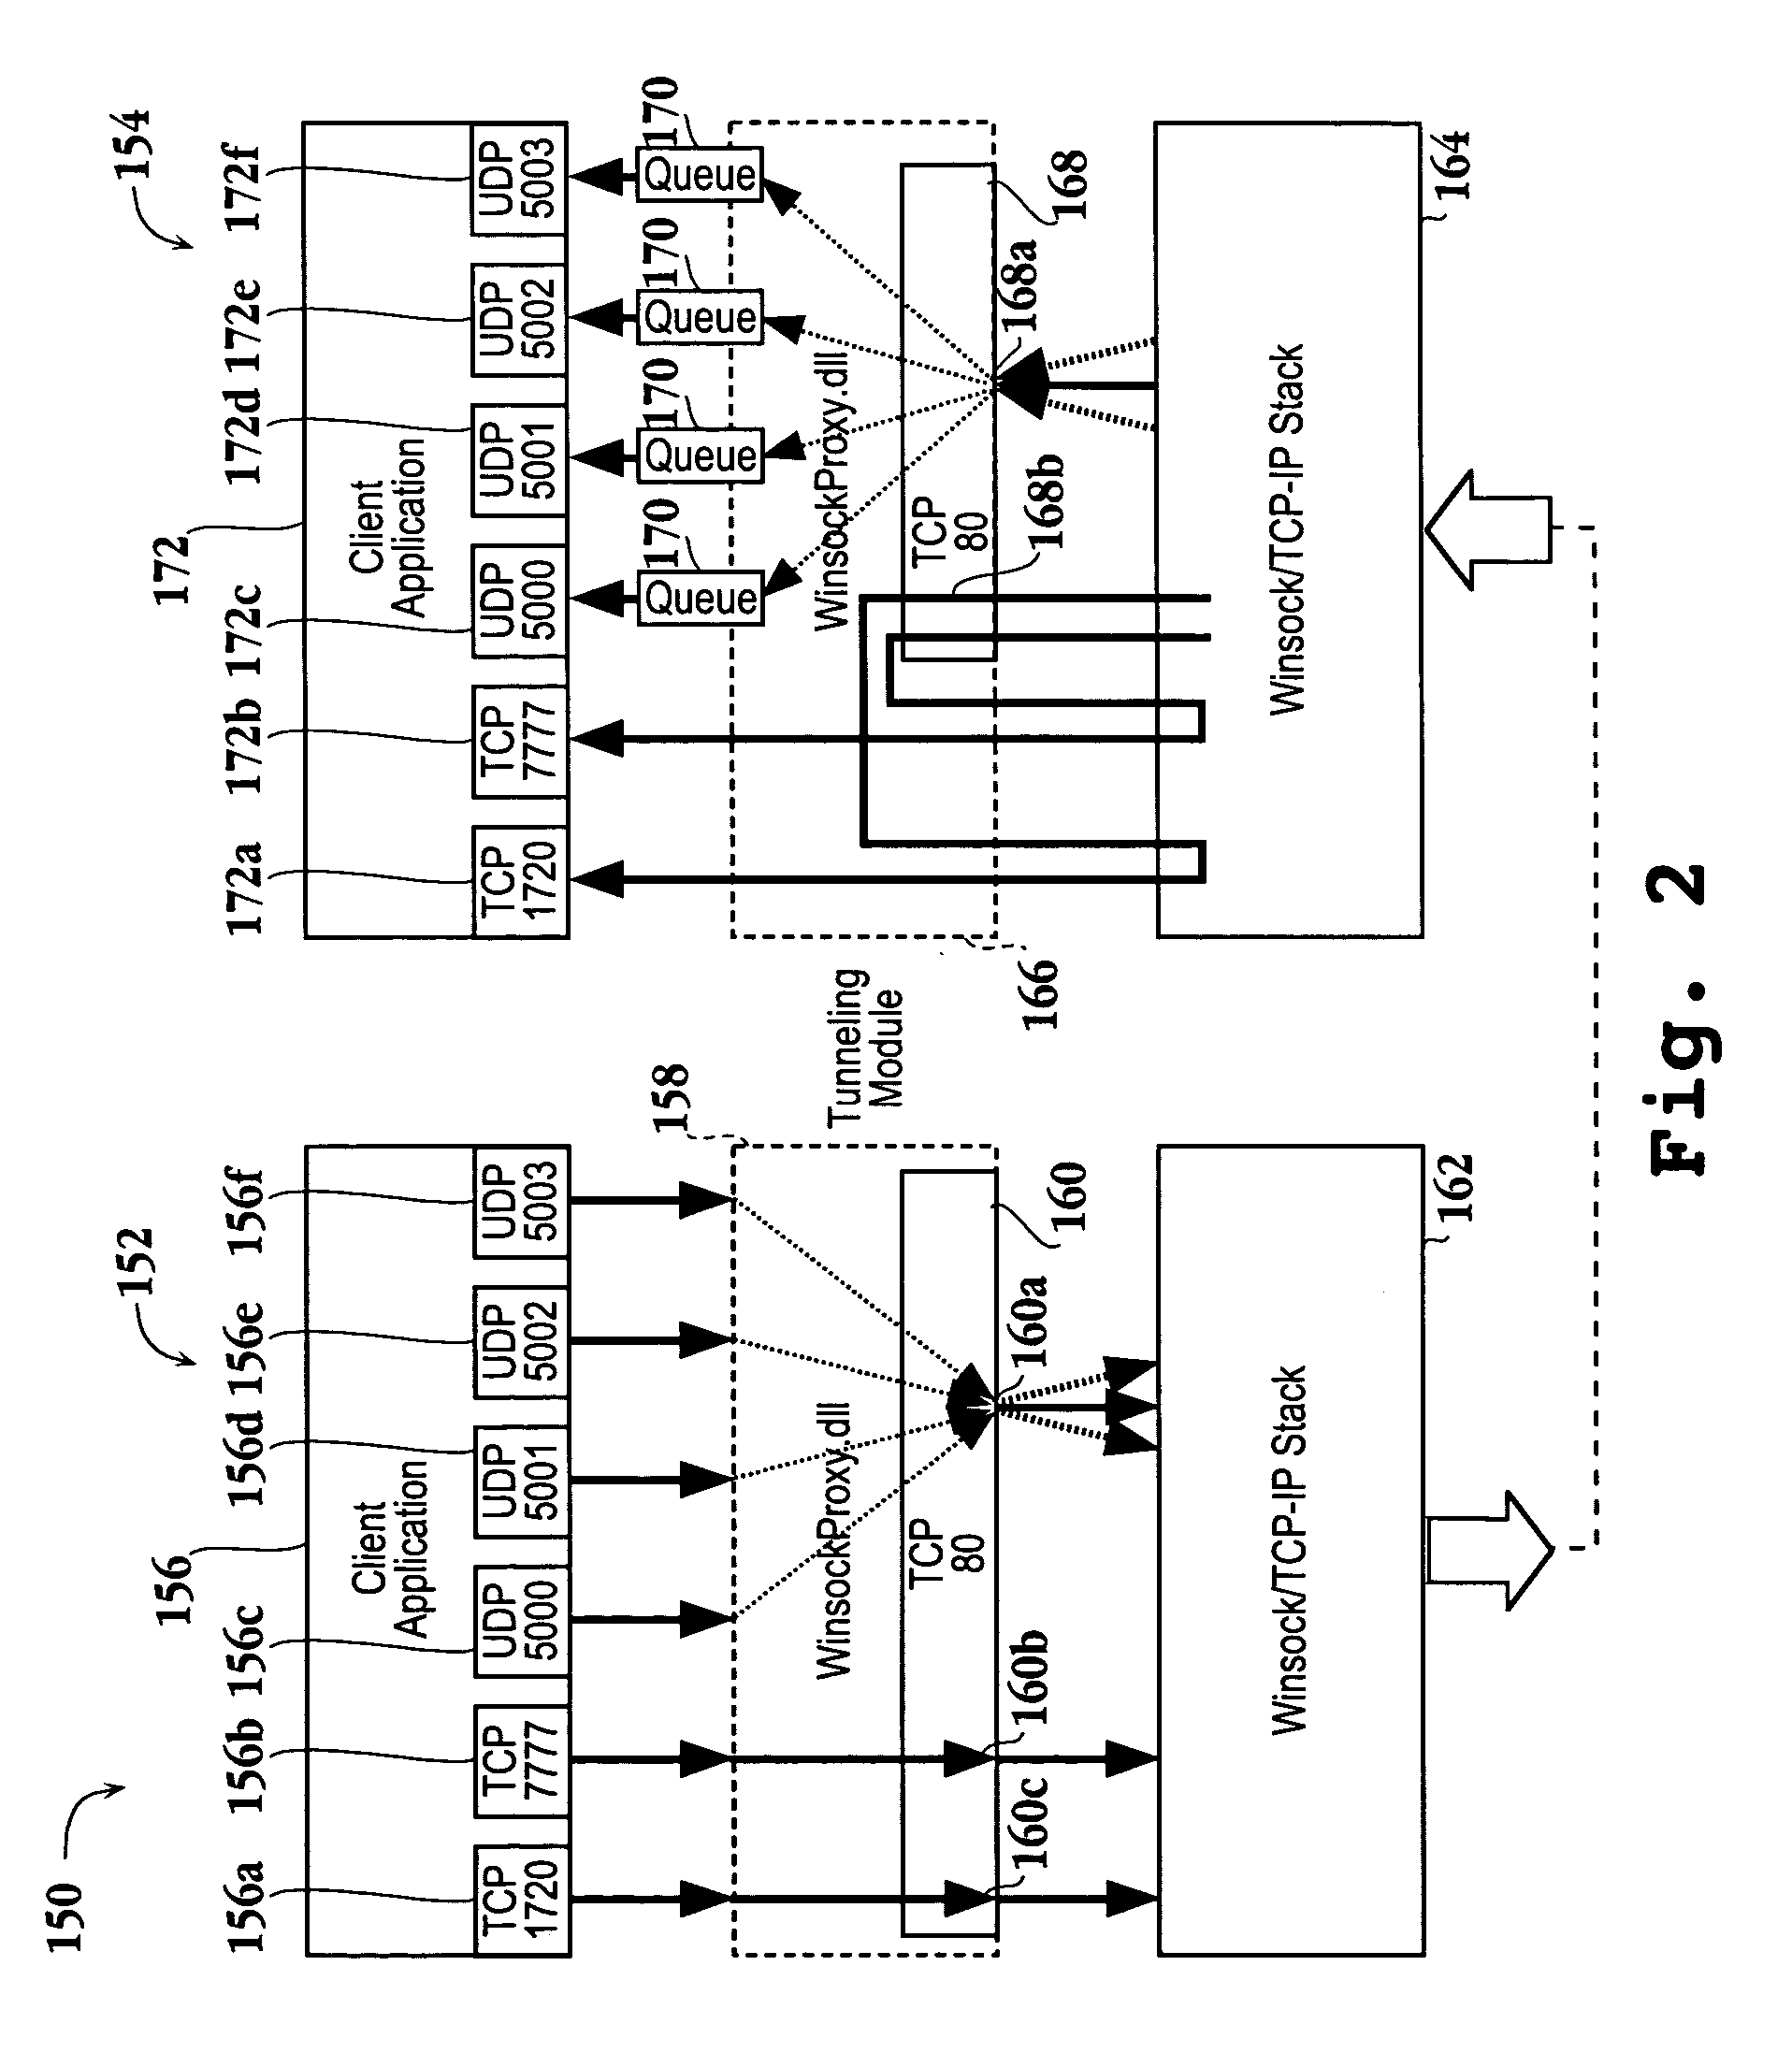 Apparatus and methods for tunneling a media streaming application through a firewall